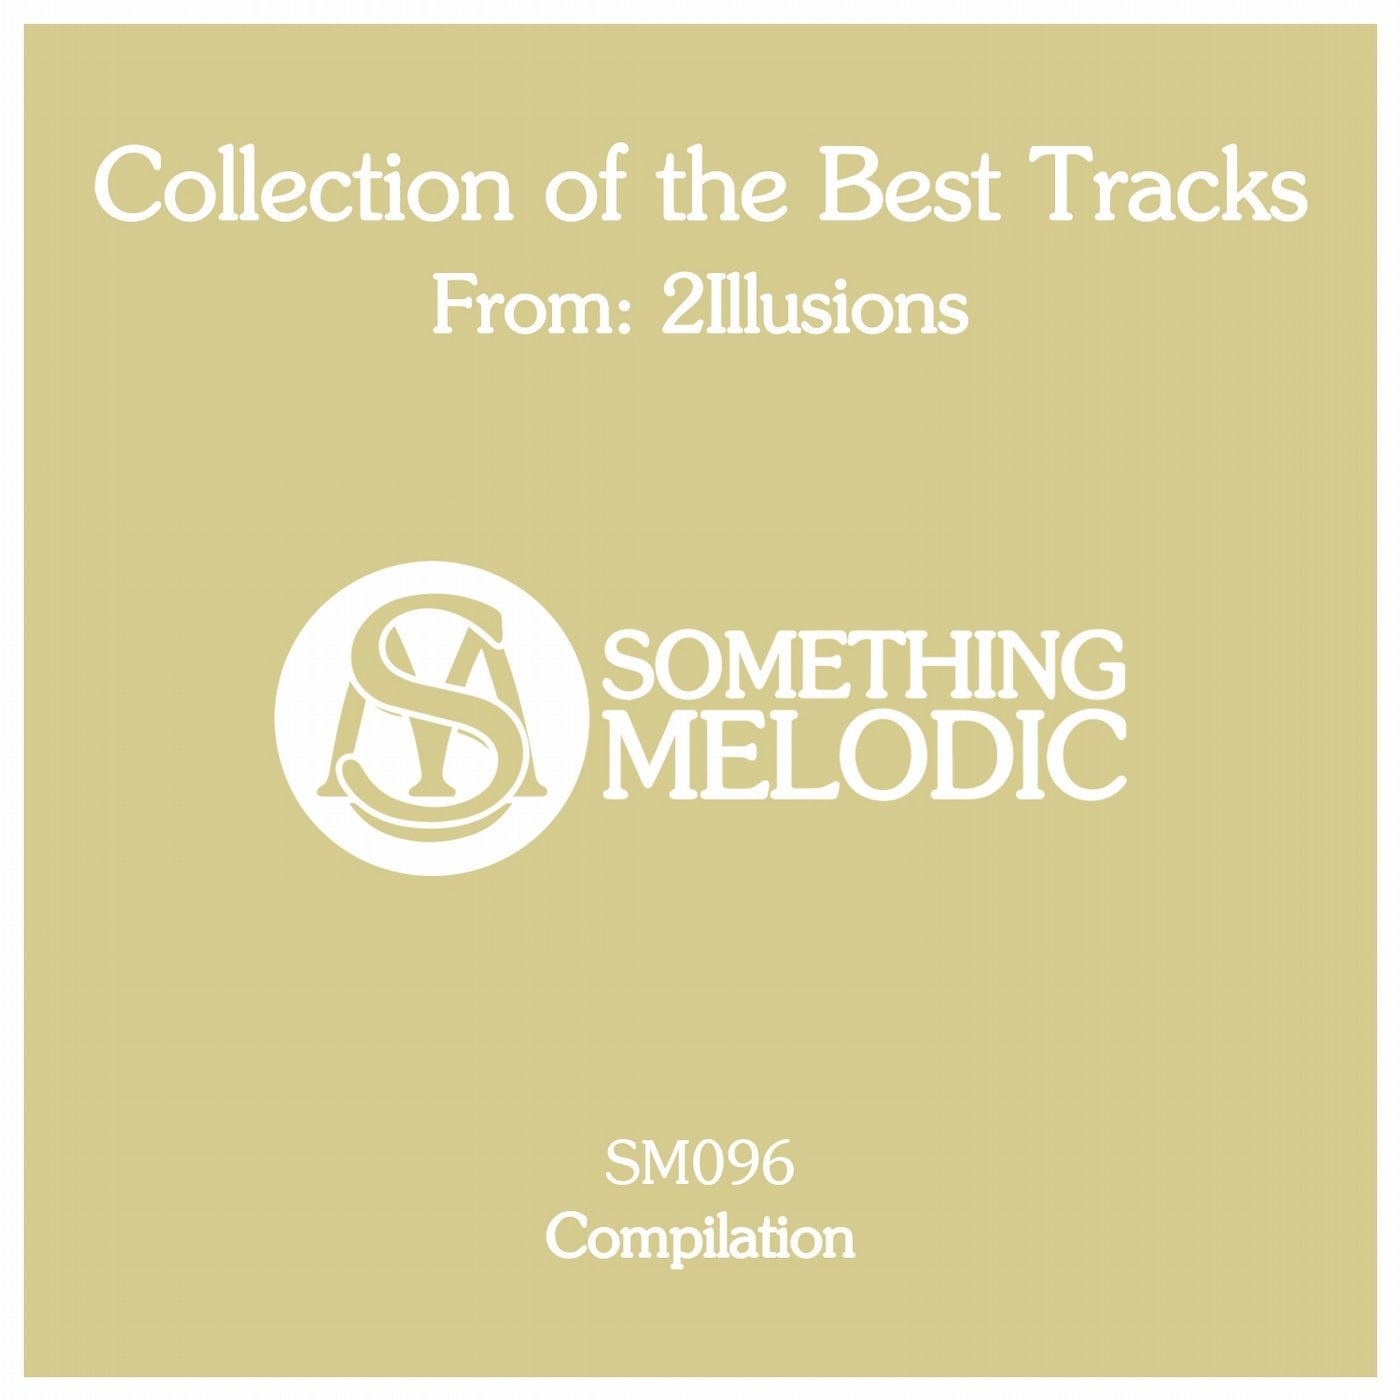 Collection of the Best Tracks From: 2Illusions